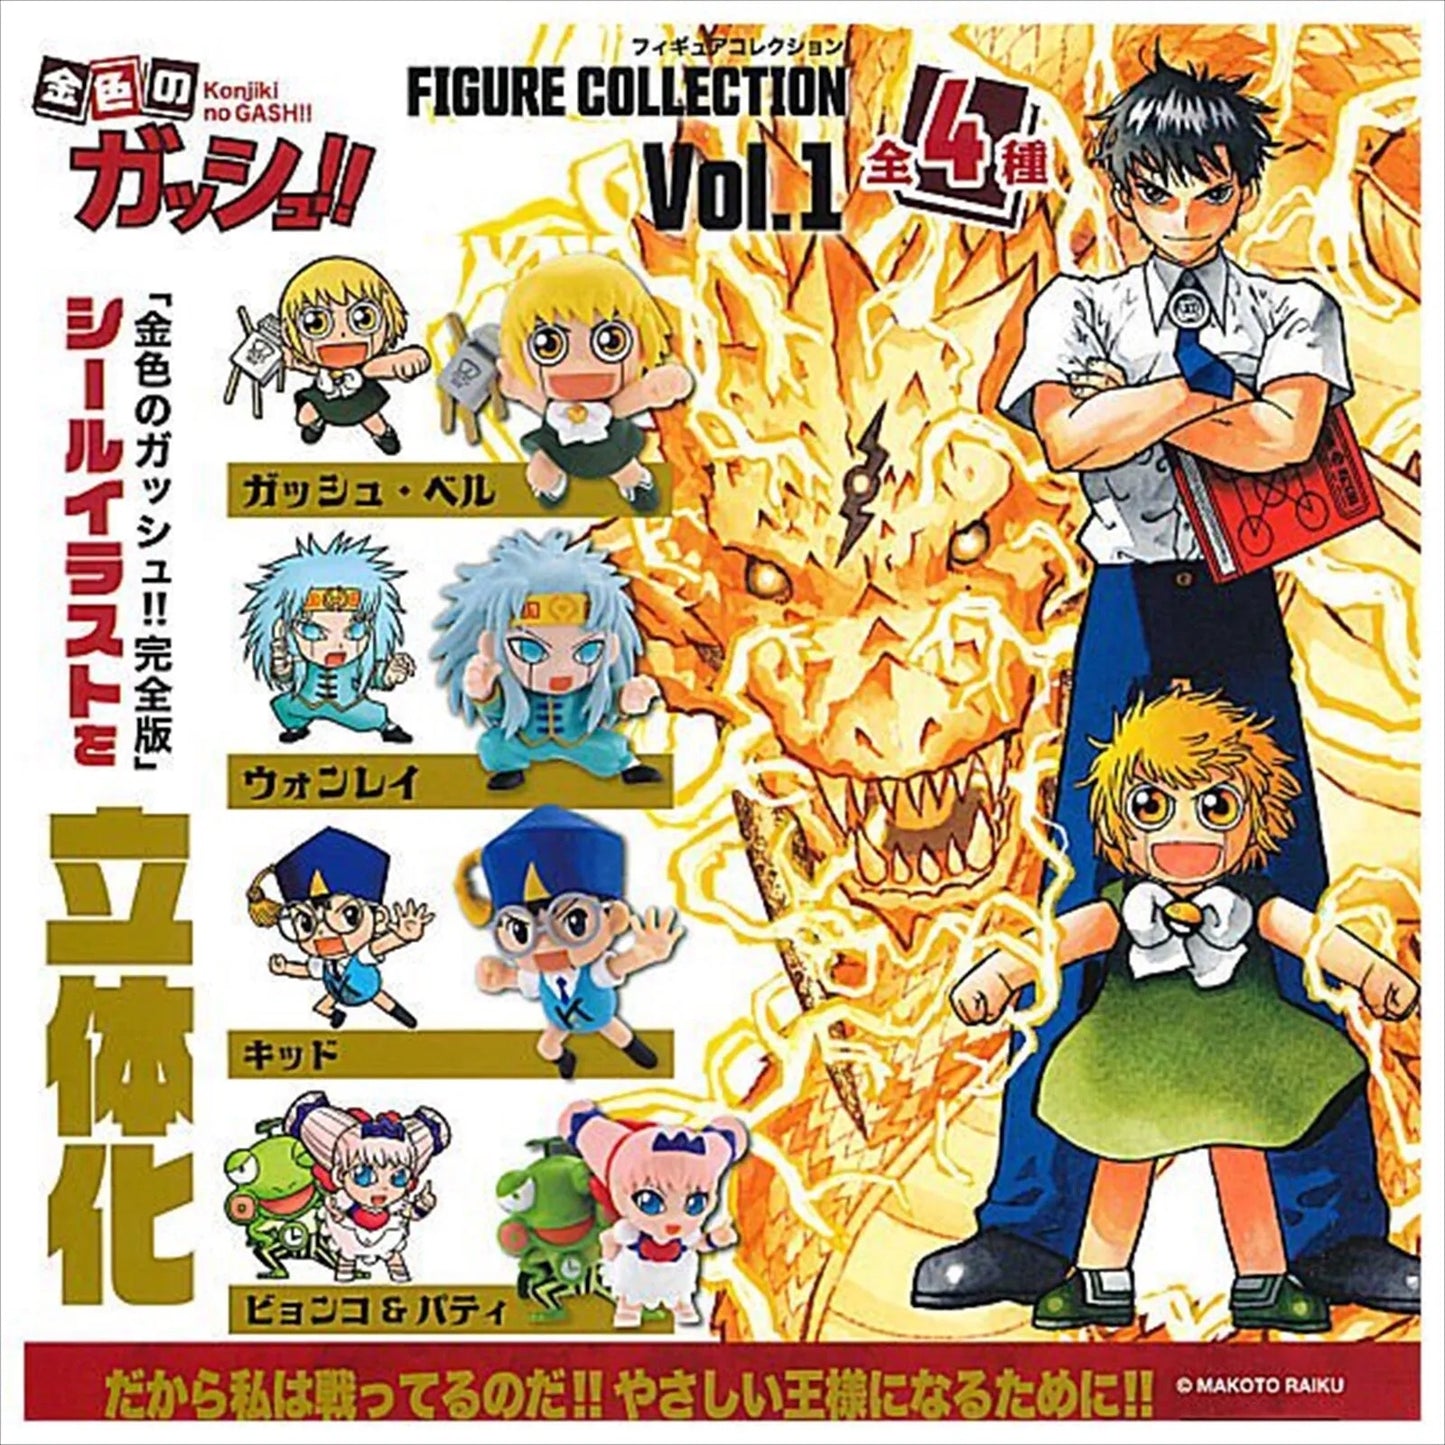 WONREI - Zatch Bell Collectible Figure Collection 1 (BRAND NEW) Japan Exclusive